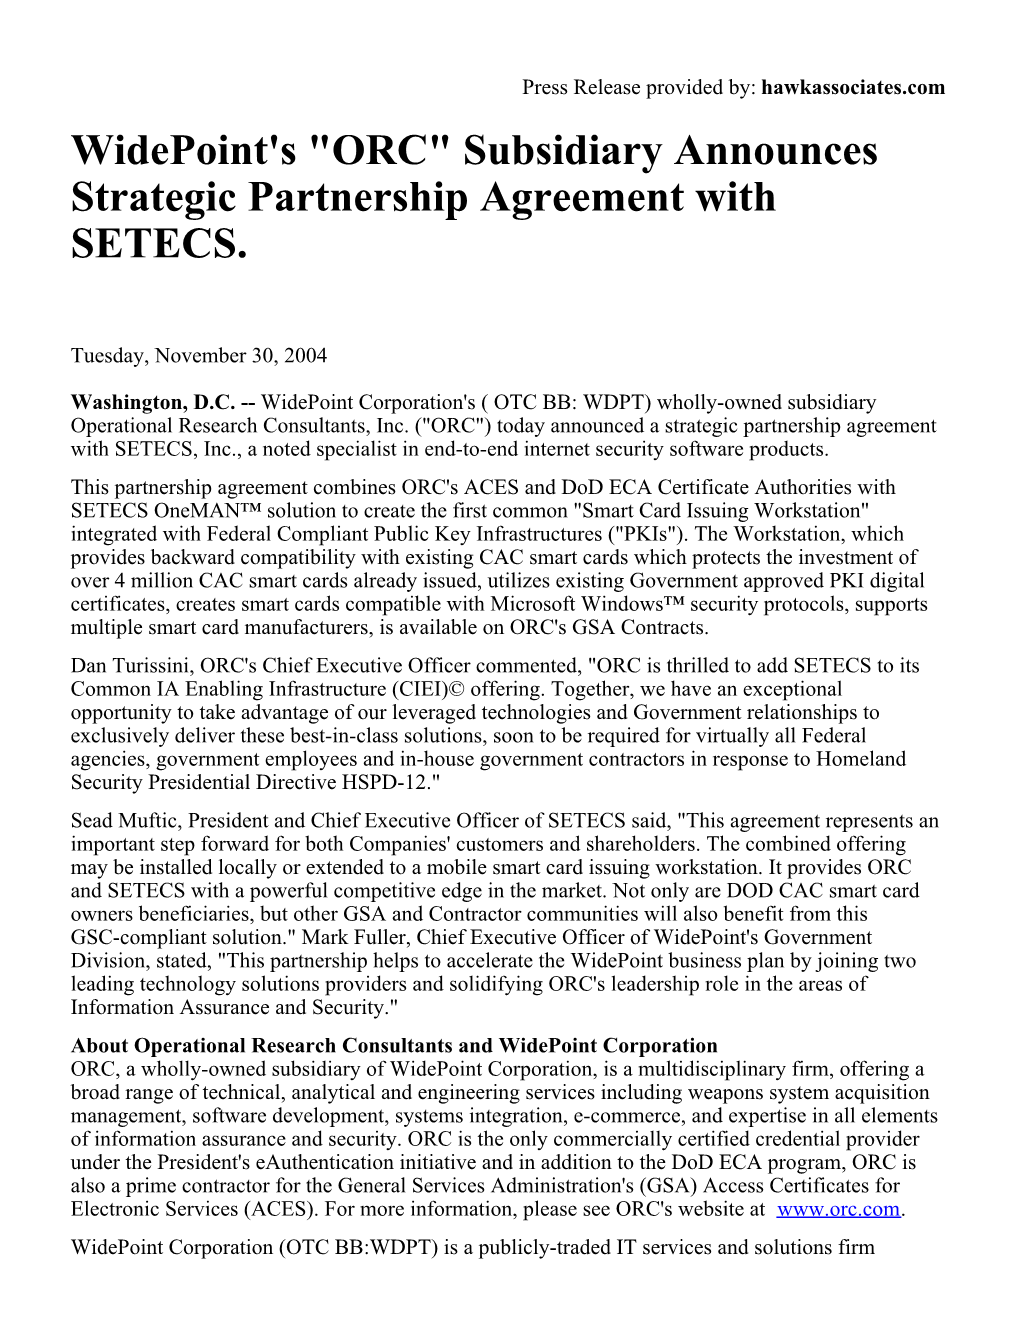 Widepoint's "ORC" Subsidiary Announces Strategic Partnership Agreement with SETECS